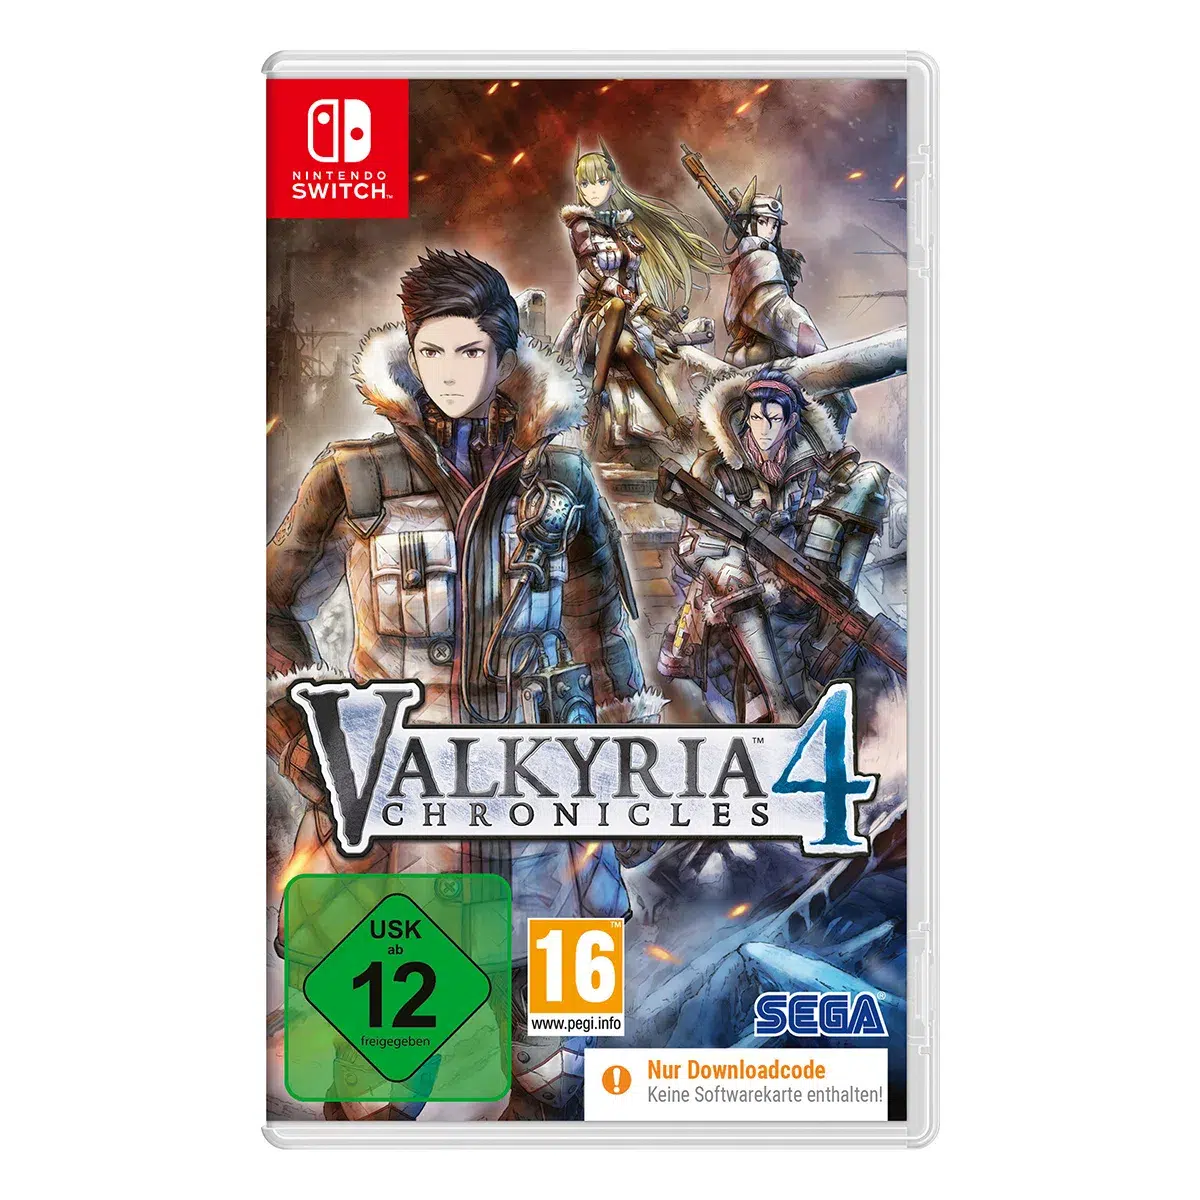 Valkyria Chronicles 4 (Switch) (Code in a Box)